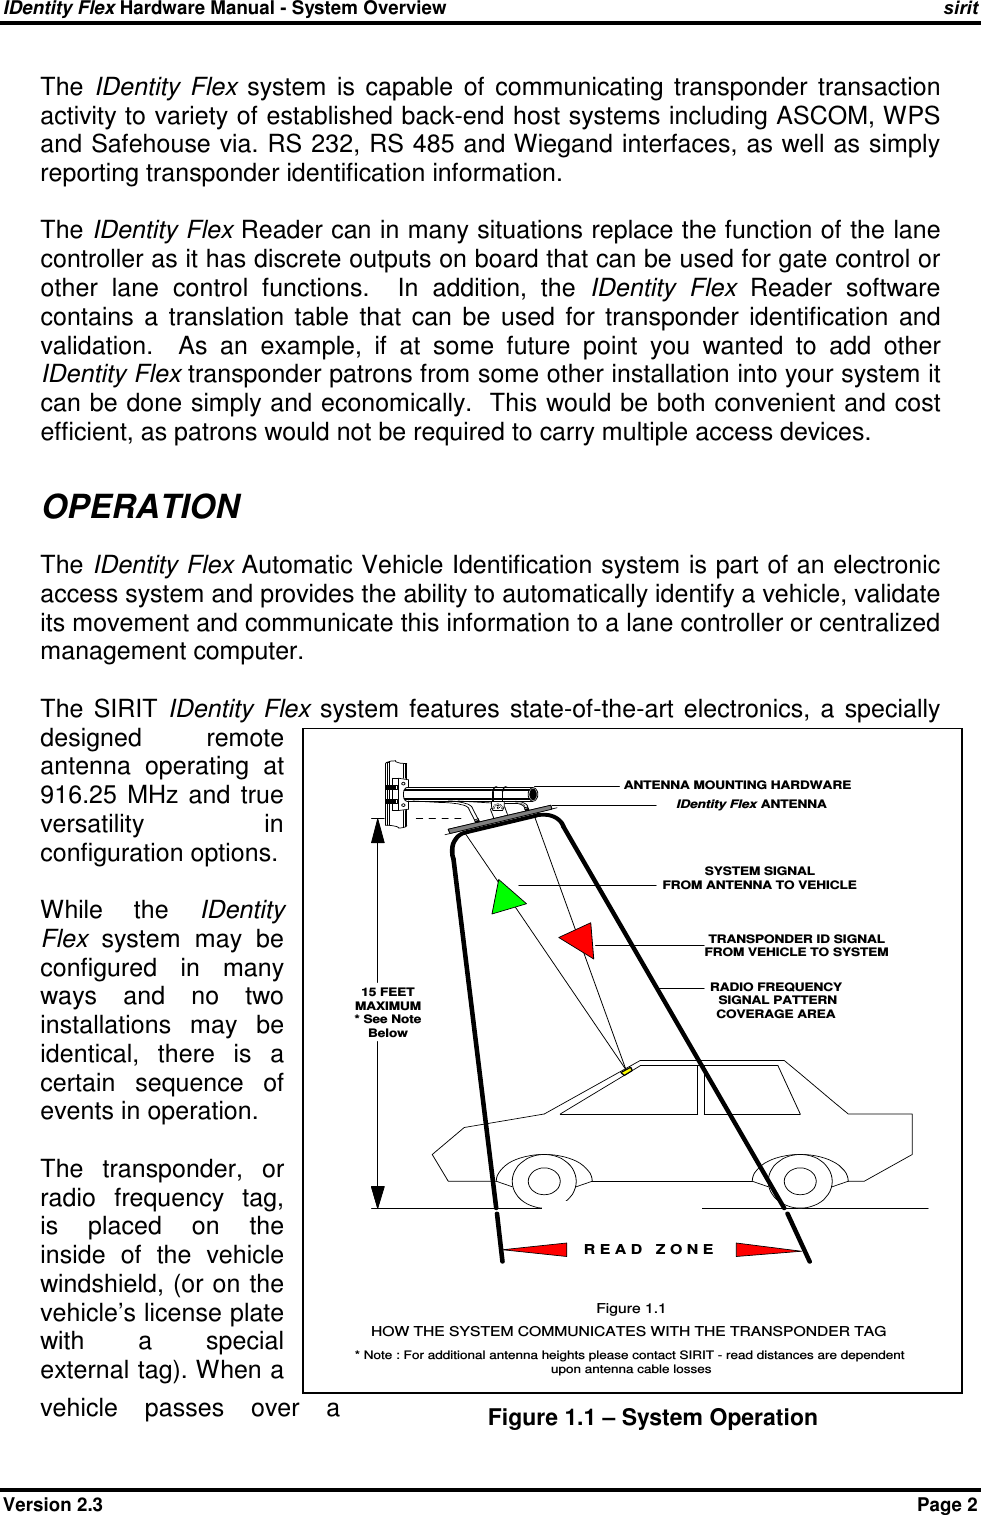 IDentity Flex Hardware Manual - System Overview    sirit Version 2.3    Page 2 The  IDentity  Flex  system  is  capable  of  communicating  transponder  transaction activity to variety of established back-end host systems including ASCOM, WPS and Safehouse via. RS 232, RS 485 and Wiegand interfaces, as well as simply reporting transponder identification information.  The IDentity Flex Reader can in many situations replace the function of the lane controller as it has discrete outputs on board that can be used for gate control or other  lane  control  functions.    In  addition,  the  IDentity  Flex  Reader  software contains  a  translation  table  that  can  be  used  for  transponder  identification  and validation.    As  an  example,  if  at  some  future  point  you  wanted  to  add  other IDentity Flex transponder patrons from some other installation into your system it can be done simply and economically.  This would be both convenient and cost efficient, as patrons would not be required to carry multiple access devices.  OPERATION The IDentity Flex Automatic Vehicle Identification system is part of an electronic access system and provides the ability to automatically identify a vehicle, validate its movement and communicate this information to a lane controller or centralized management computer.  The  SIRIT  IDentity  Flex system  features  state-of-the-art  electronics,  a  specially designed  remote antenna  operating  at 916.25  MHz  and  true versatility  in configuration options.  While  the  IDentity Flex  system  may  be configured  in  many ways  and  no  two installations  may  be identical,  there  is  a certain  sequence  of events in operation.  The  transponder,  or radio  frequency  tag, is  placed  on  the inside  of  the  vehicle windshield, (or on the vehicle’s license plate with  a  special external tag). When a vehicle  passes  over  a  Figure 1.1 – System Operation RADIO FREQUENCY SIGNAL PATTERNCOVERAGE AREAANTENNA MOUNTING HARDWAREIDentity Flex ANTENNASYSTEM SIGNALFROM ANTENNA TO VEHICLETRANSPONDER ID SIGNALFROM VEHICLE TO SYSTEMHOW THE SYSTEM COMMUNICATES WITH THE TRANSPONDER TAGFigure 1.1R E A D   Z O N E15 FEETMAXIMUM* See NoteBelow* Note : For additional antenna heights please contact SIRIT - read distances are dependentupon antenna cable losses 